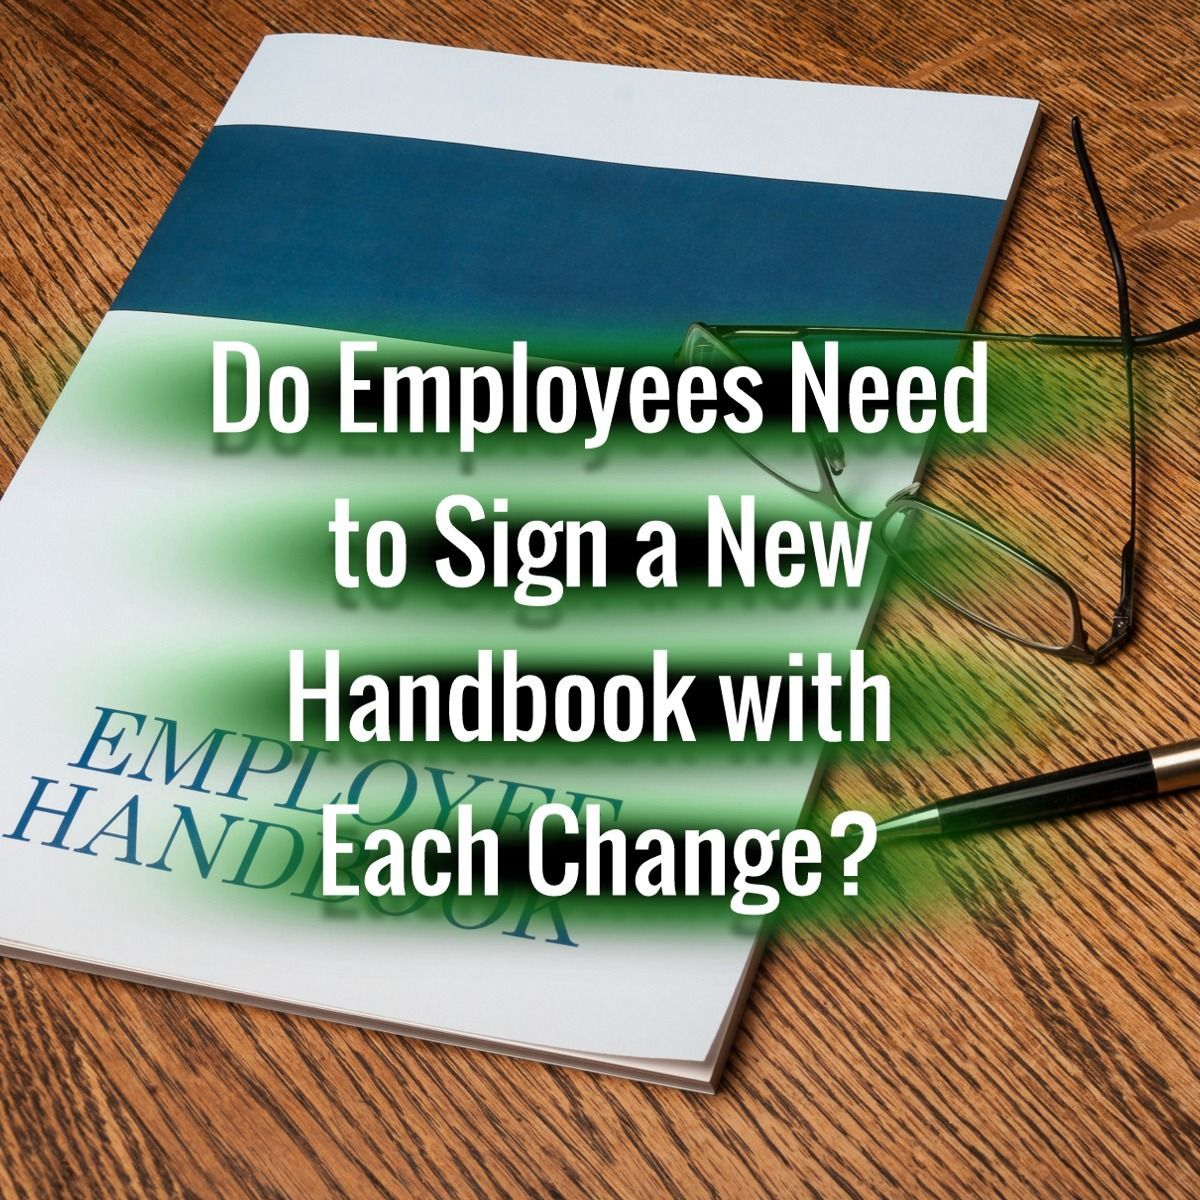 Do Employees Need to Sign a New Handbook with Each Change?